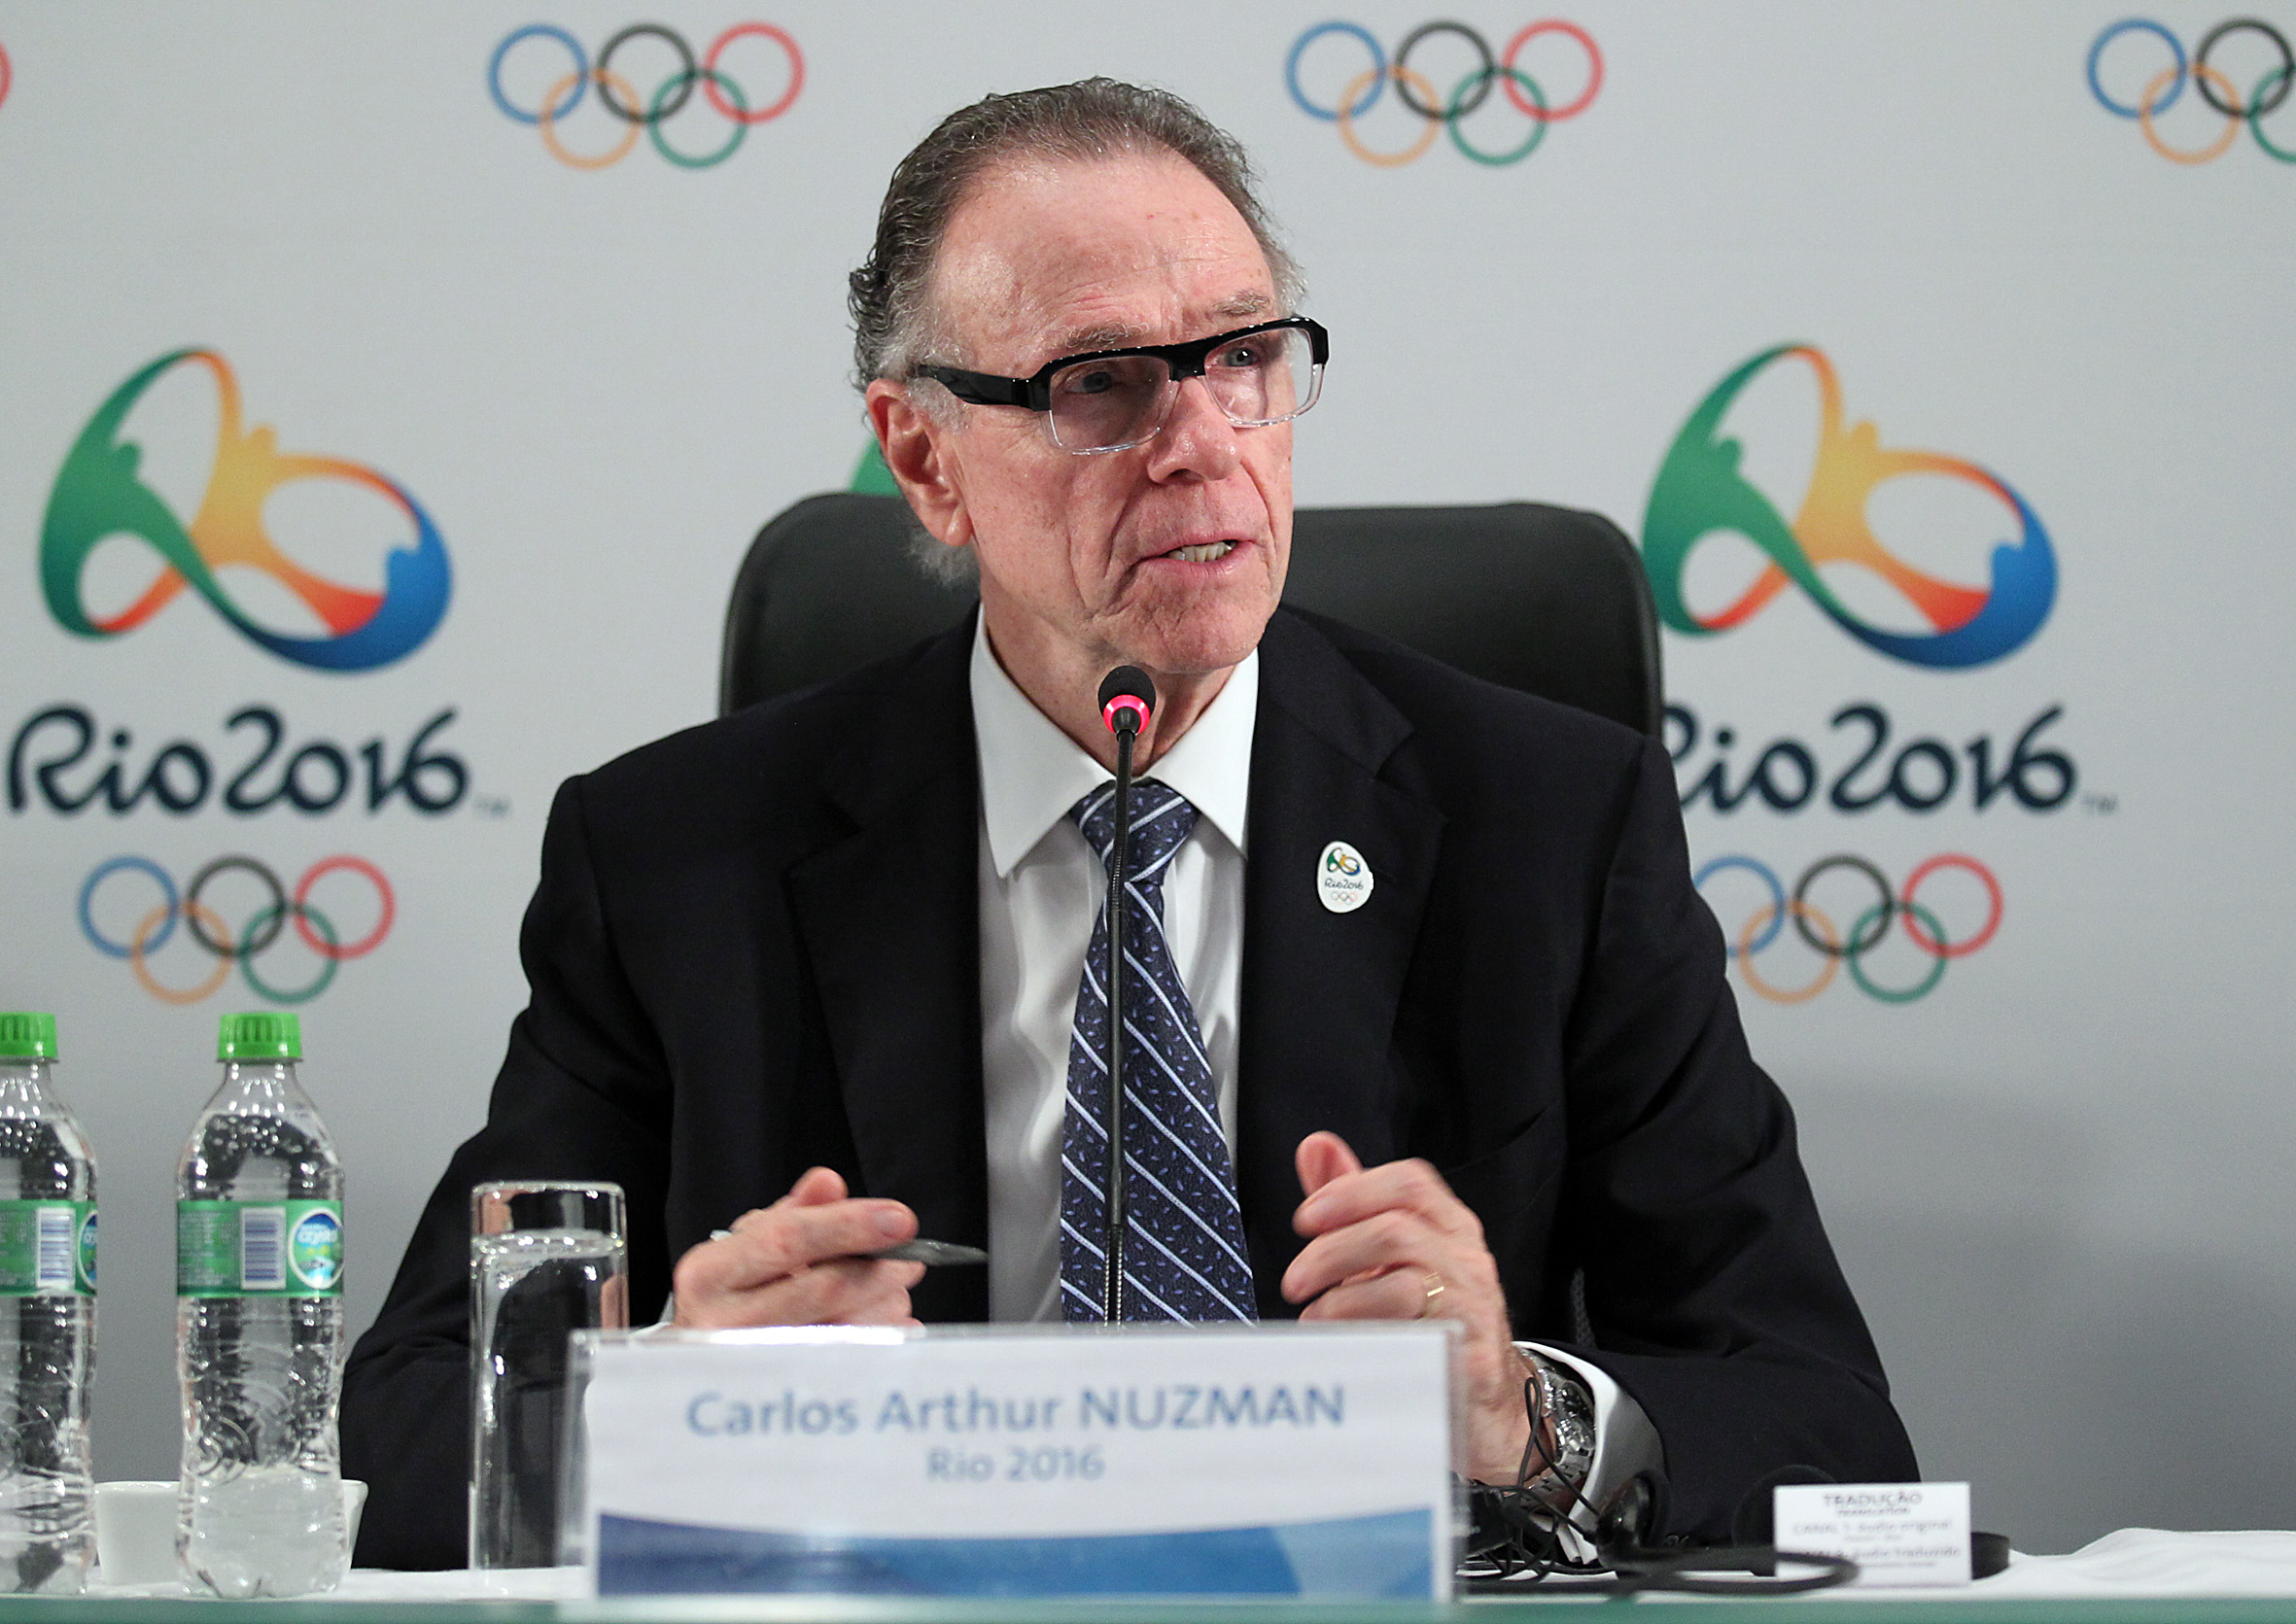 Carlos Nuzman_in_front_of_Rio_2016_logo_and_new_badge